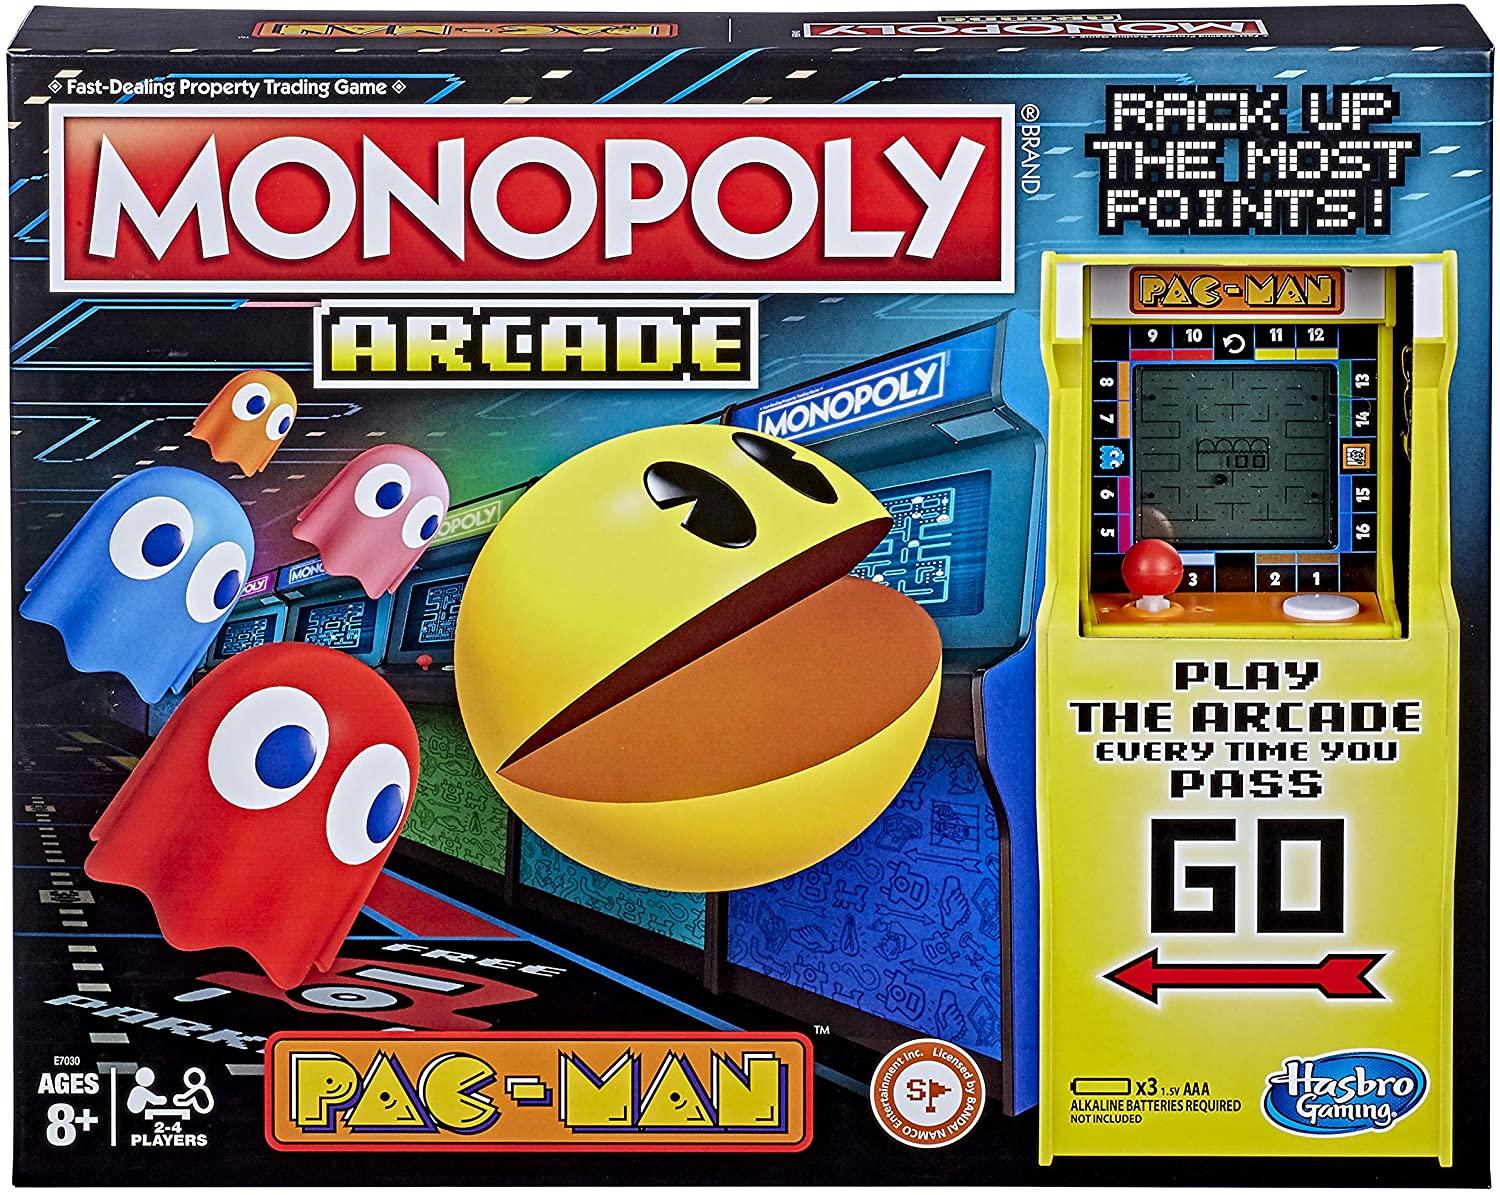 Monopoly Arcade Pac-Man Board Game with Banking and Arcade for $12.15